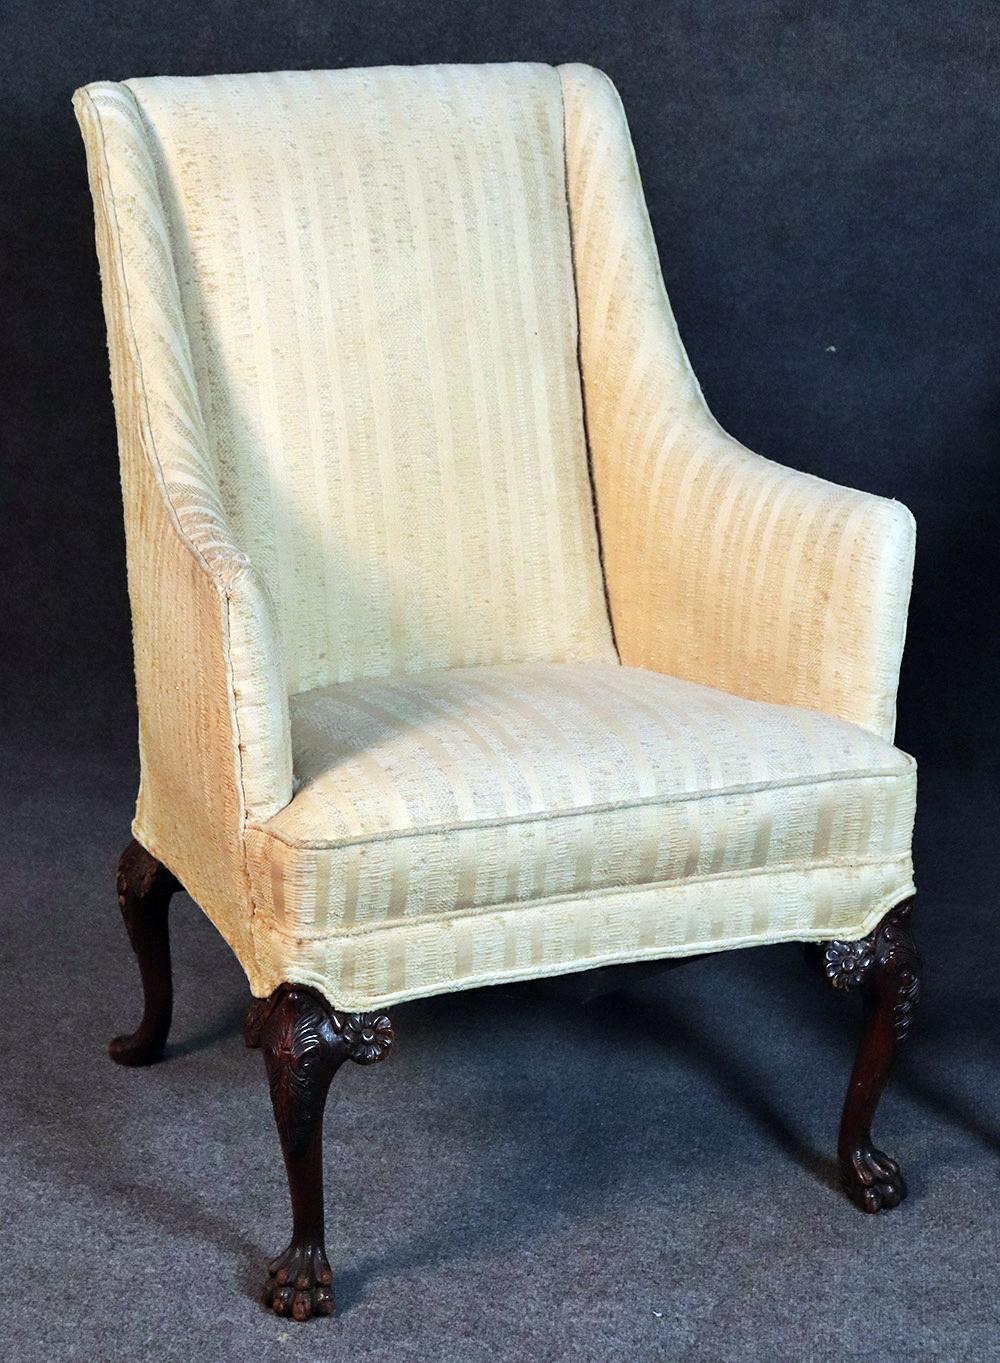 Pair of Georgian style mahogany lounge chairs with claw feet.